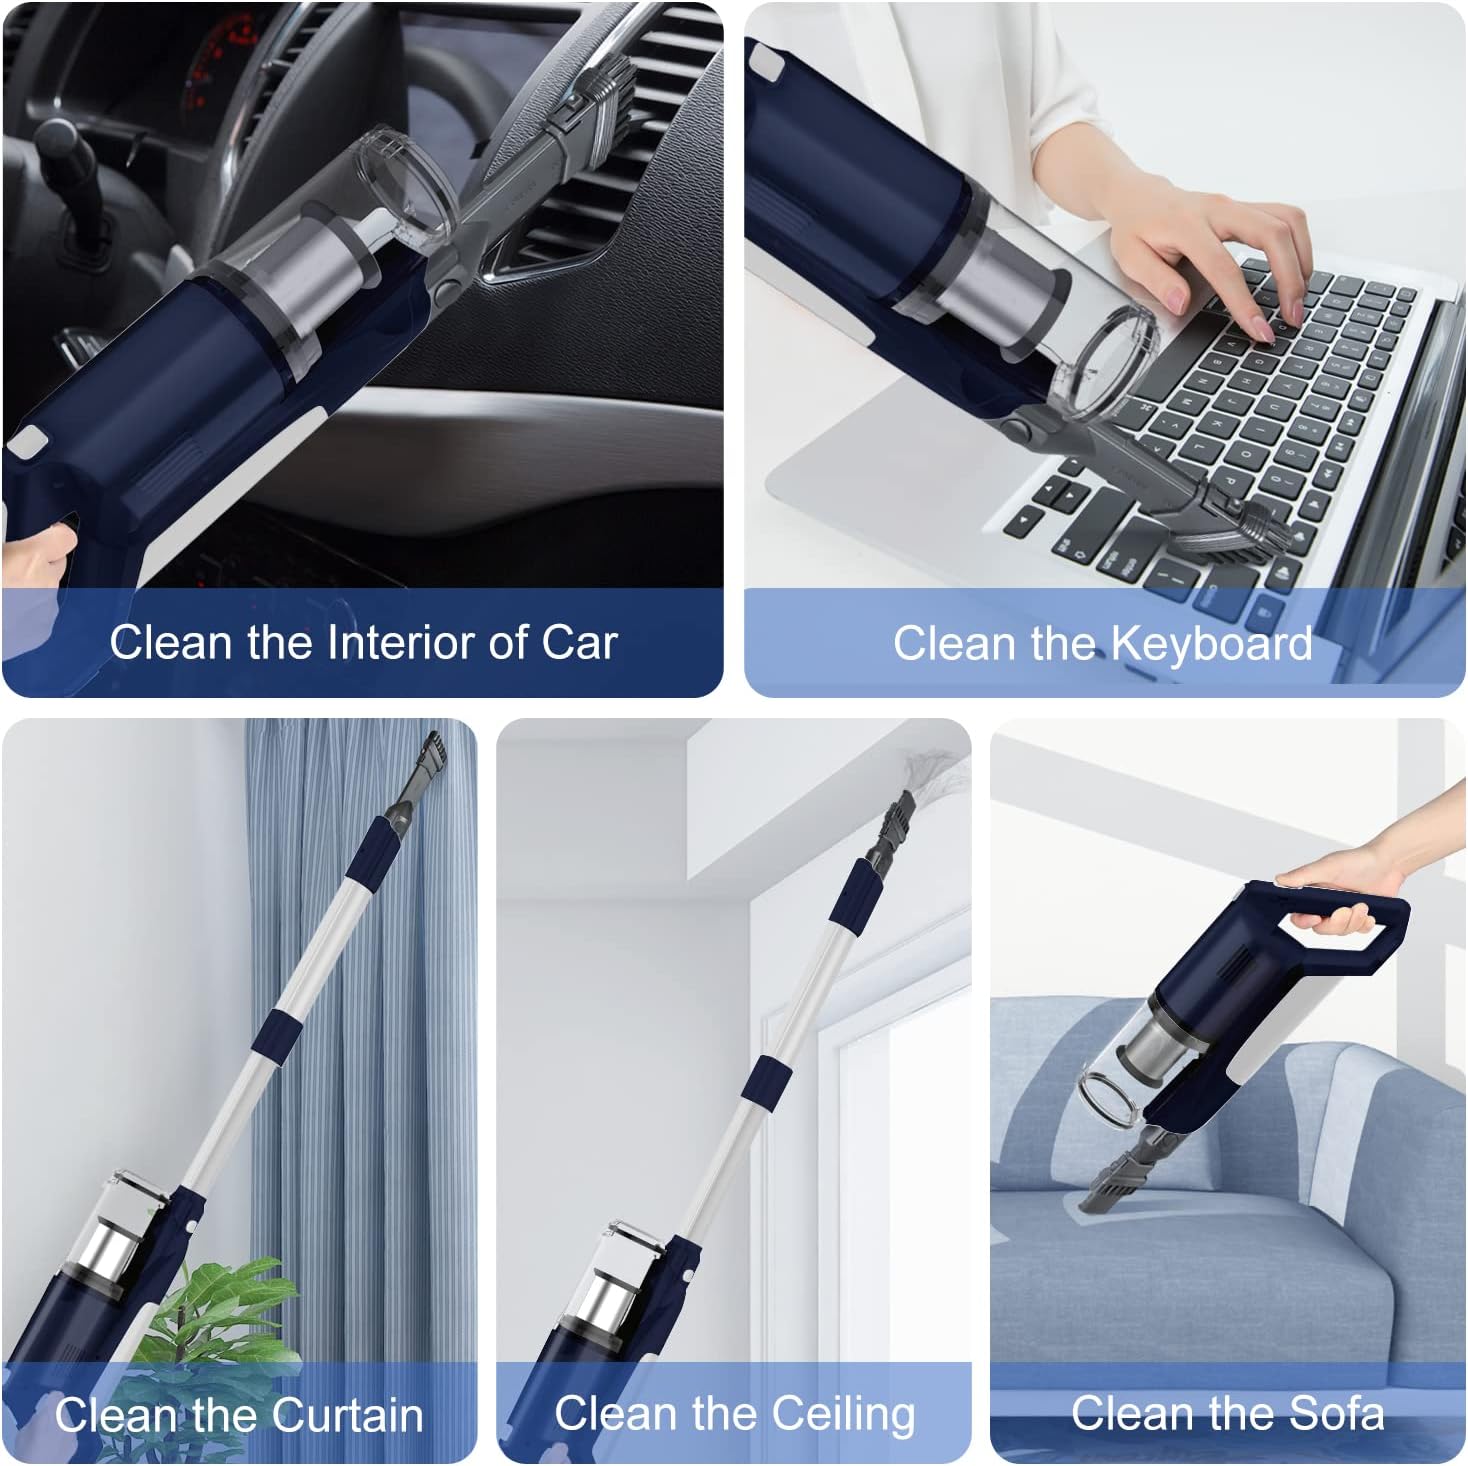 Whall® 4 in 1 Foldable 280W Brushless Handheld Lightweight Motor Cordless Stick Vacuum Blue-Silver Color